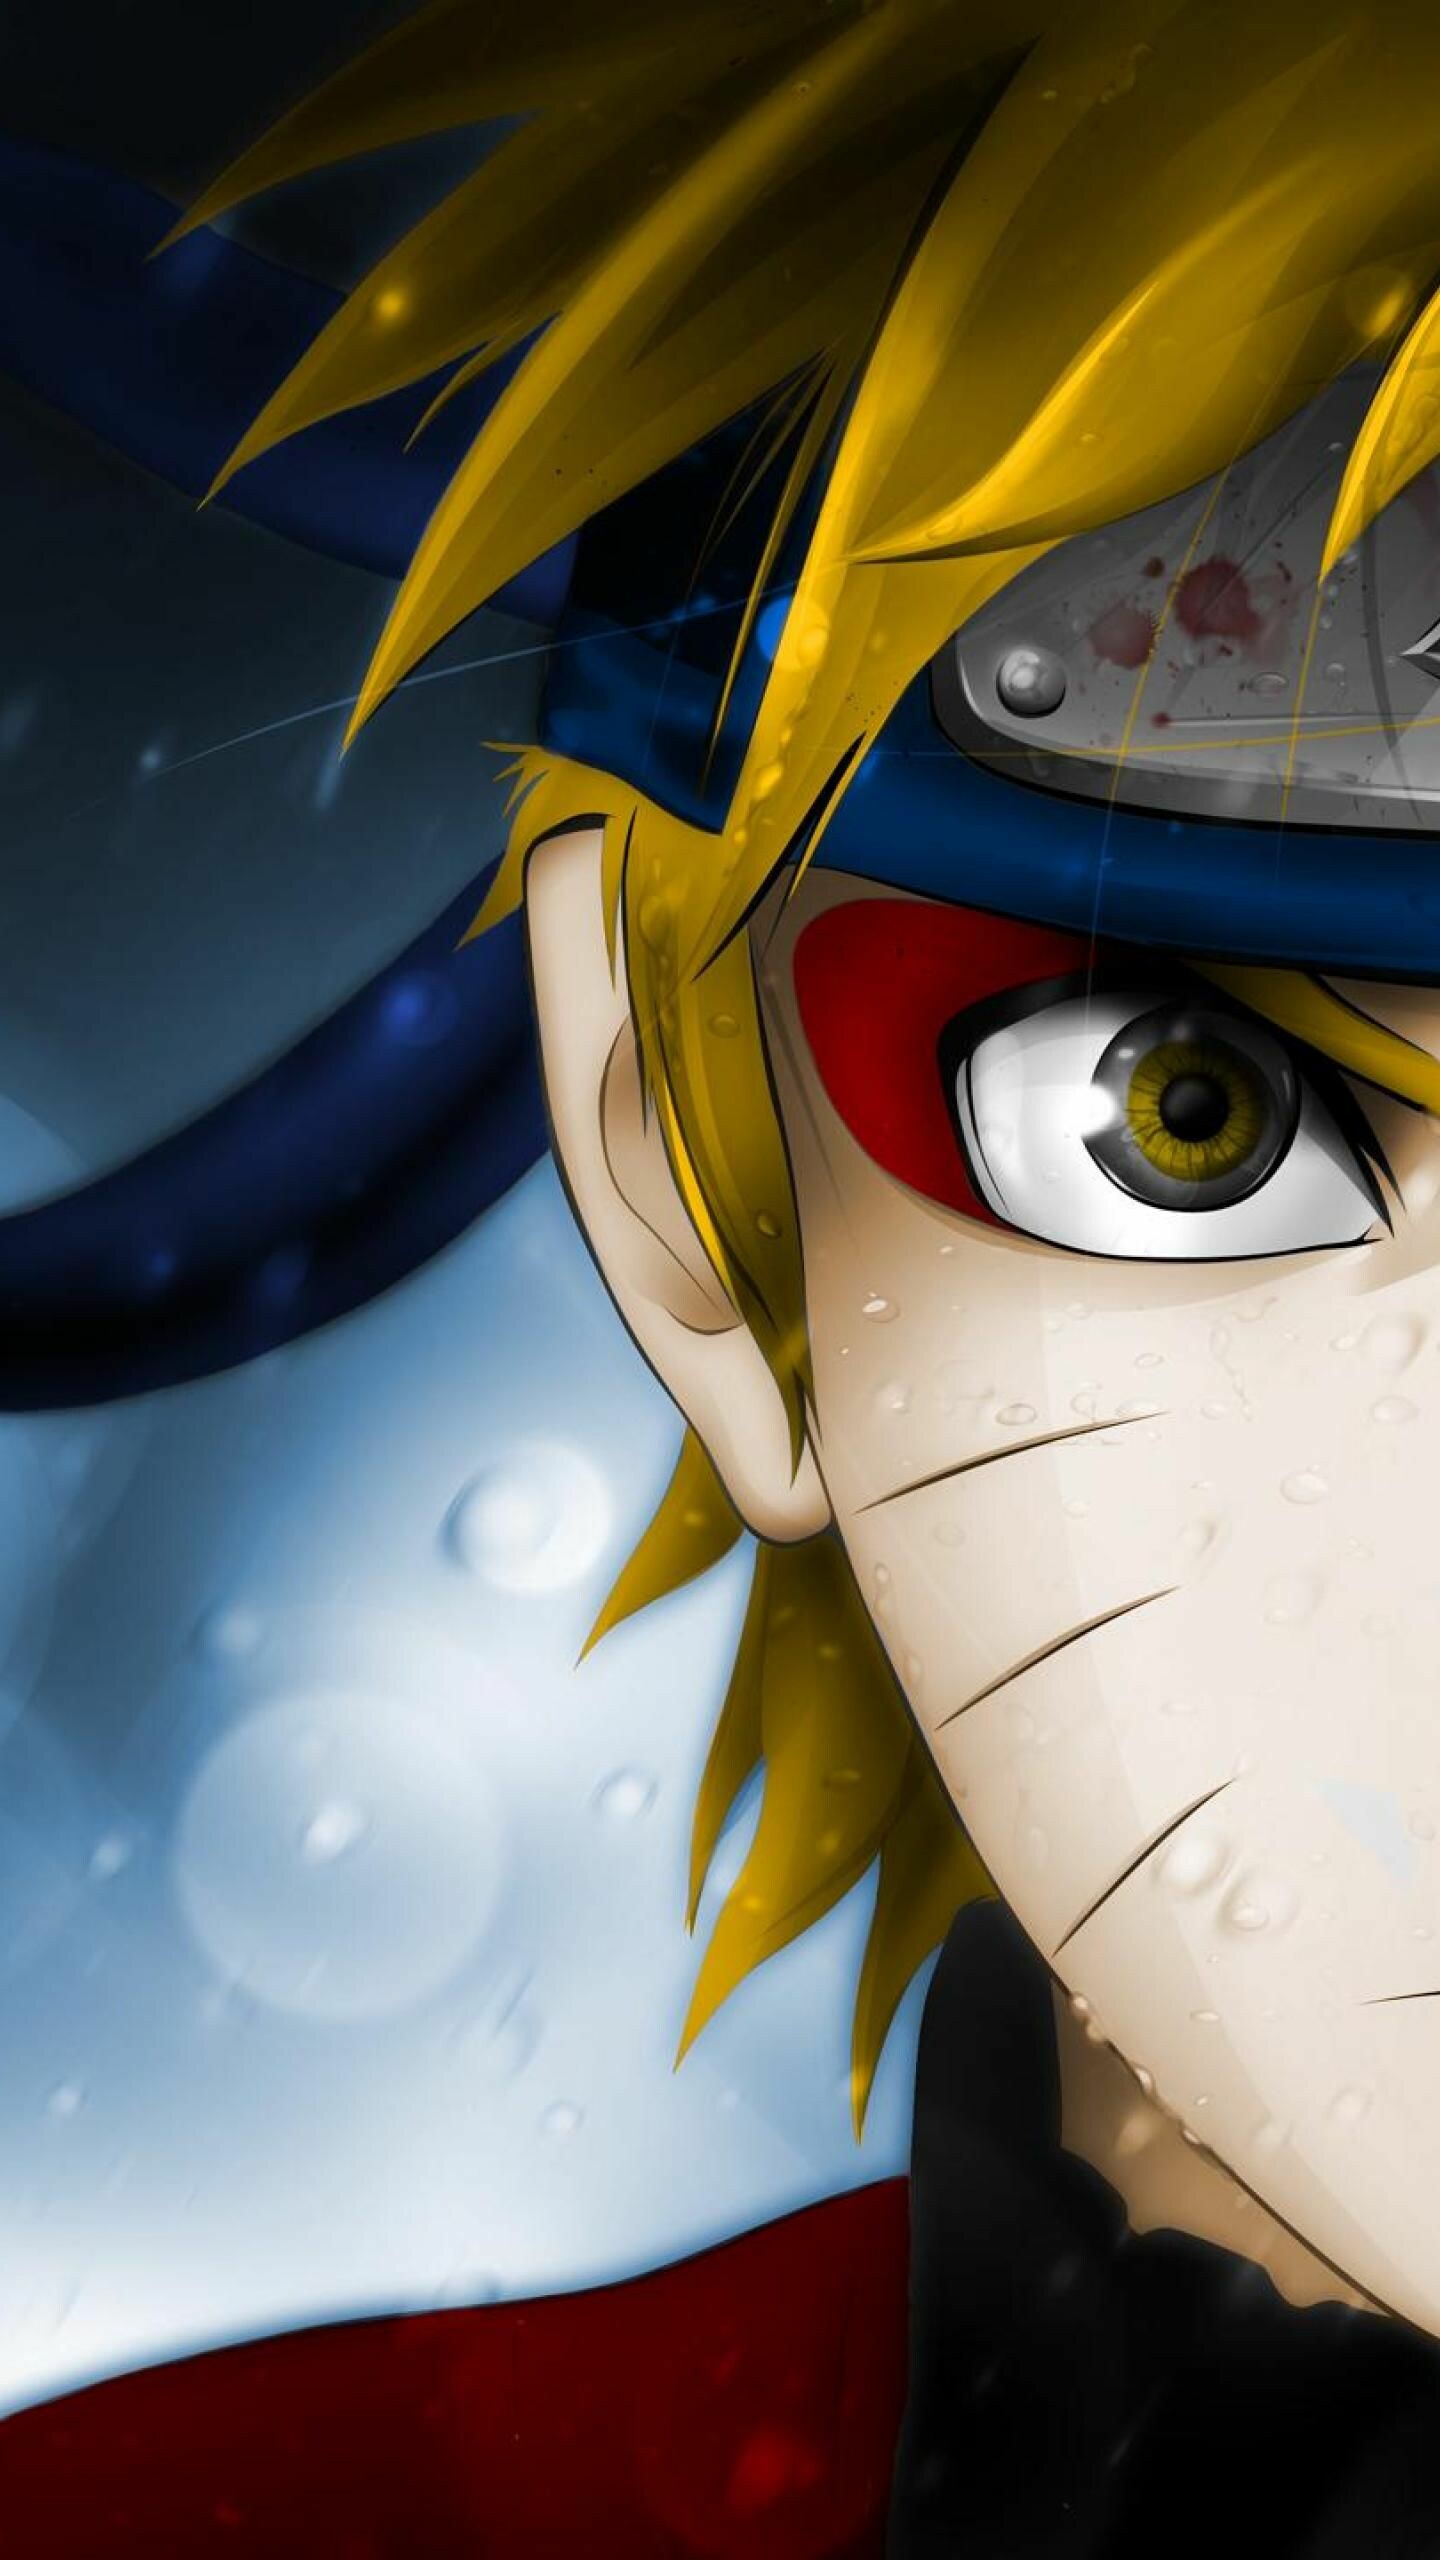 4K Naruto Wallpaper: HD, 4K, 5K for PC and Mobile. Download free image for iPhone, Android